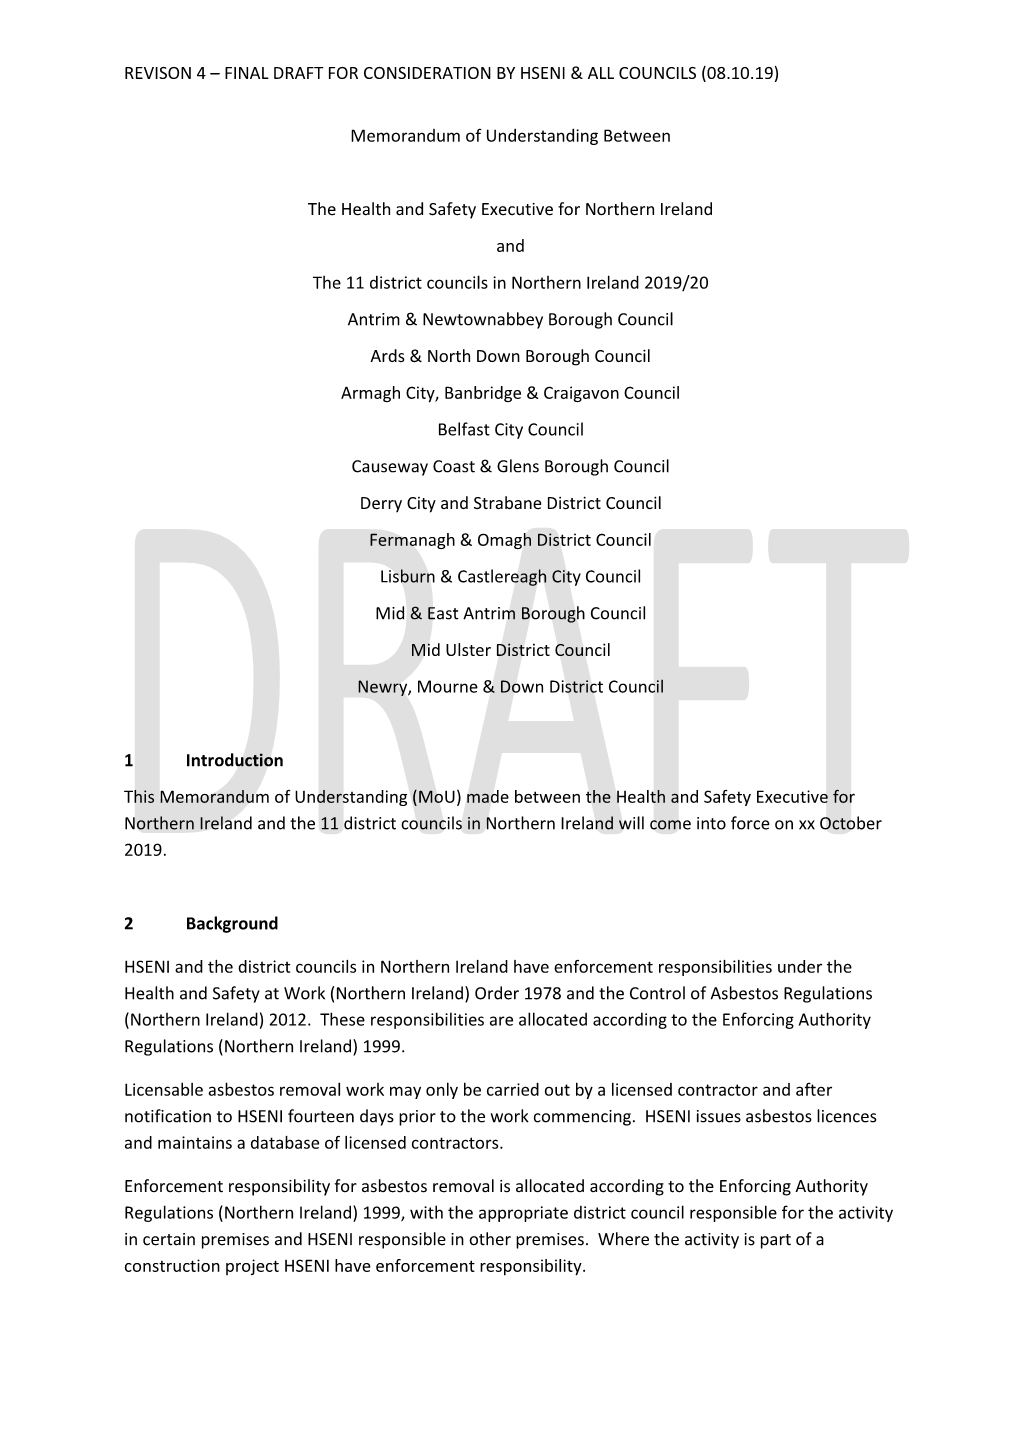 Revison 4 – Final Draft for Consideration by Hseni & All Councils (08.10.19)